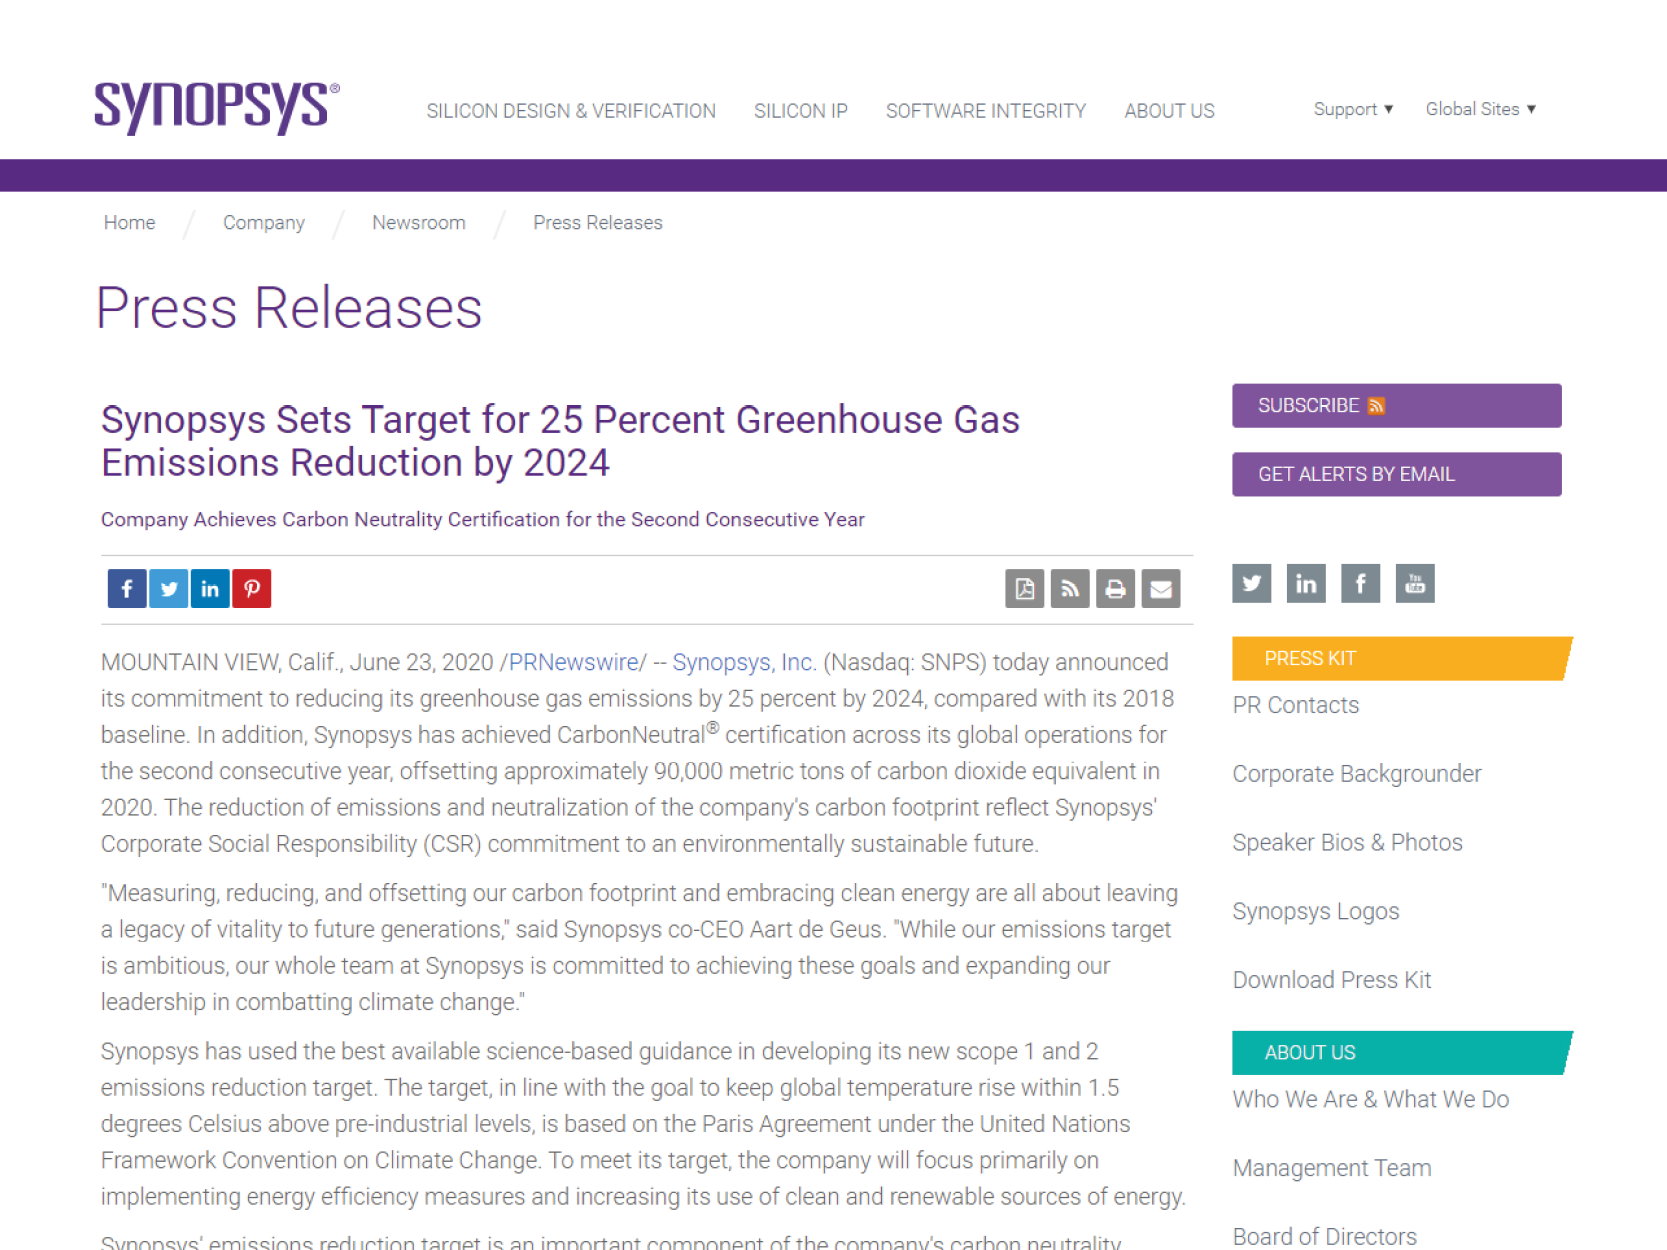 Synopsys achieves CarbonNeutral certification for second year